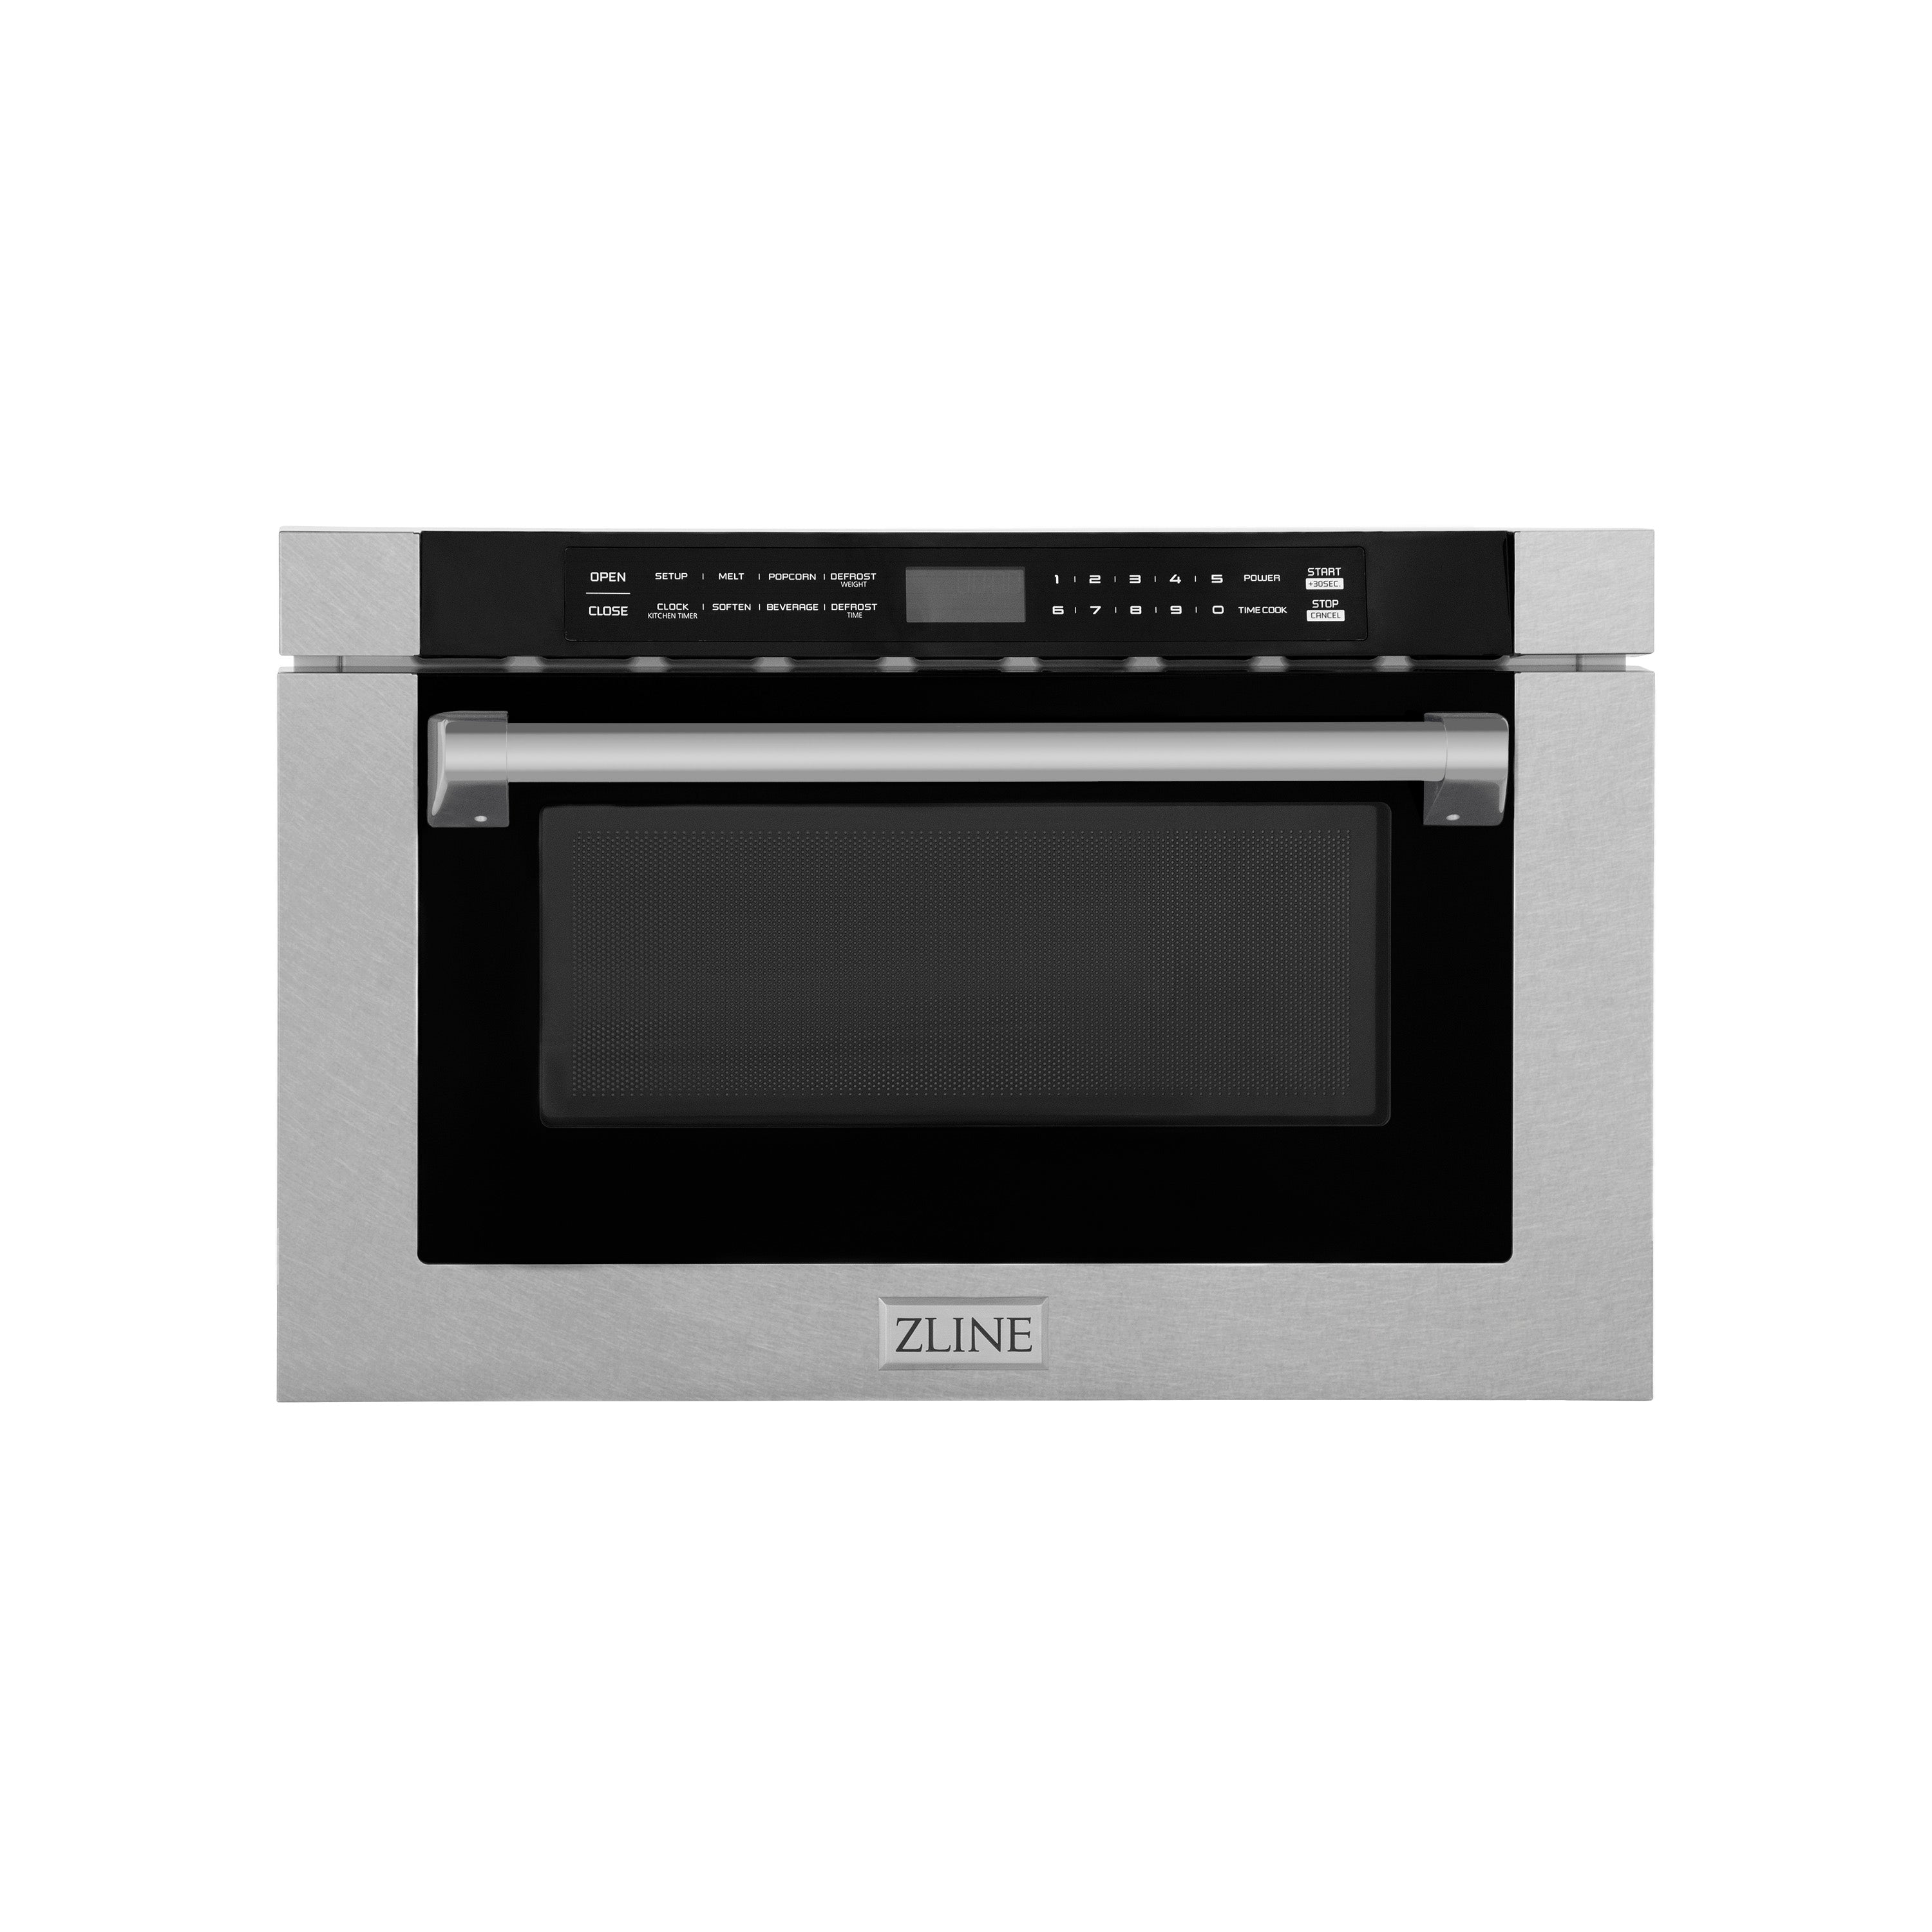 ZLINE 24" 1.2 cu. ft. Built-in Microwave Drawer with a Traditional Handle in Fingerprint Resistant  Stainless Steel